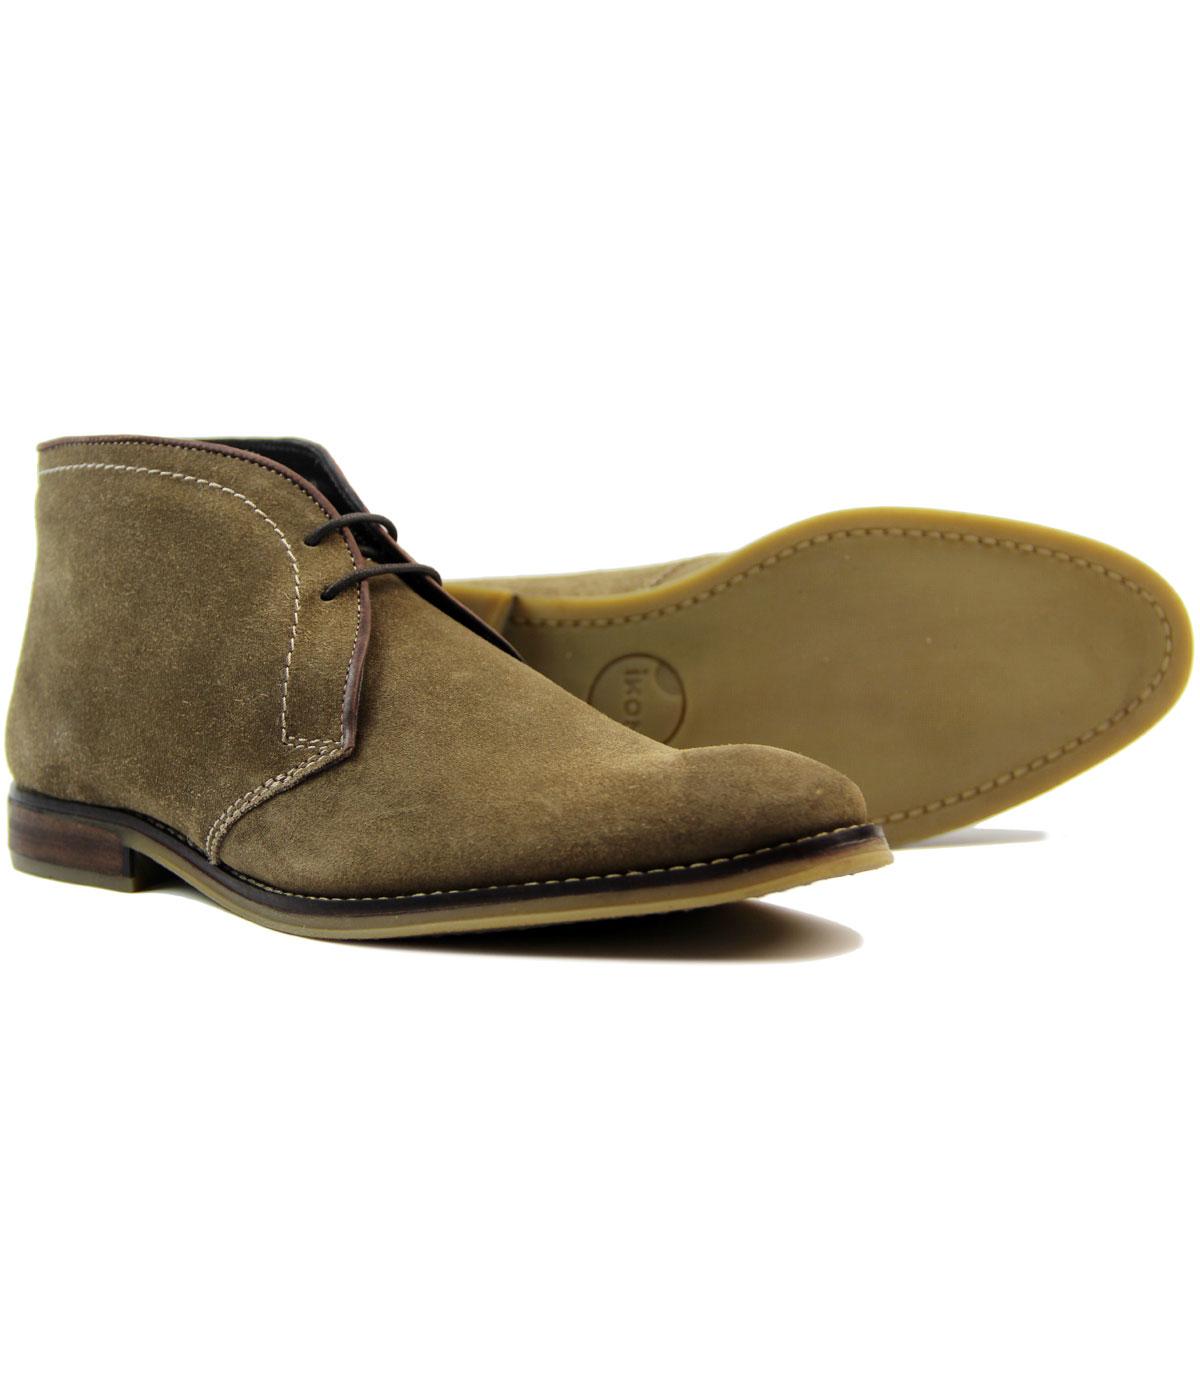 IKON Newton Retro 1960s Mod Suede Piped Trim Desert Boots Taupe